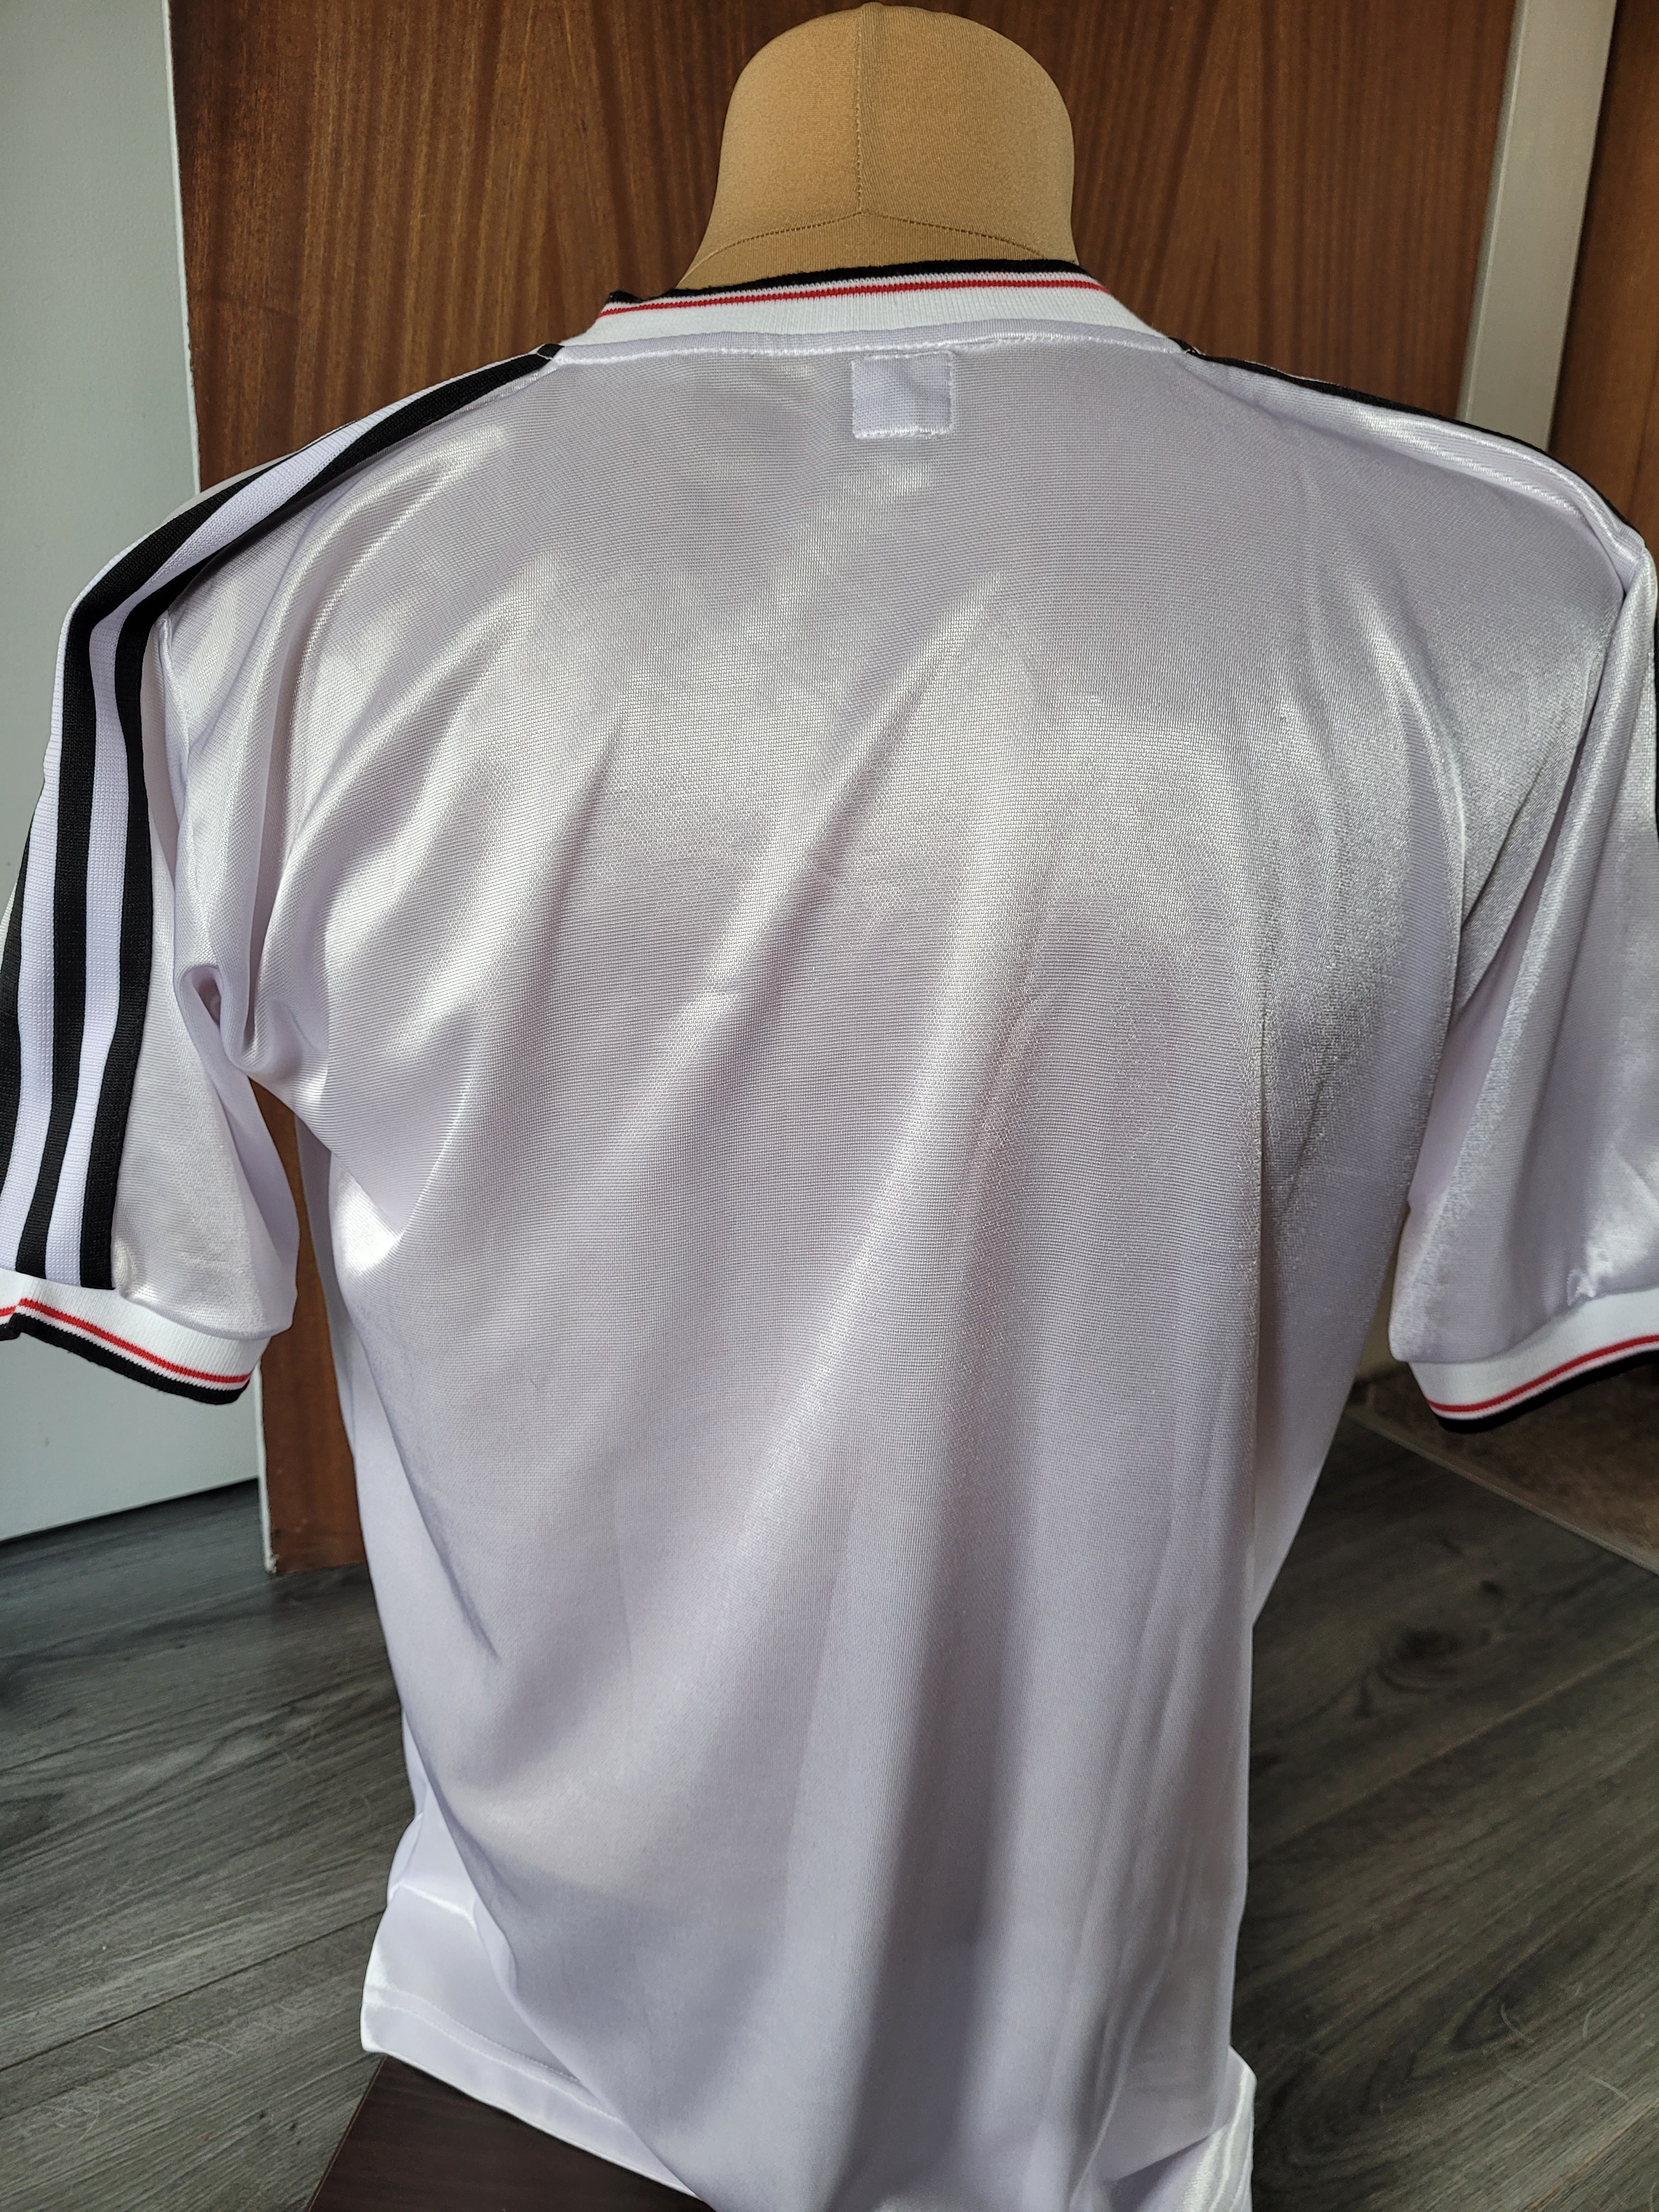 MANCHESTER UNITED EARLY 1980'S REPLICA AWAY SHIRT - Image 2 of 3